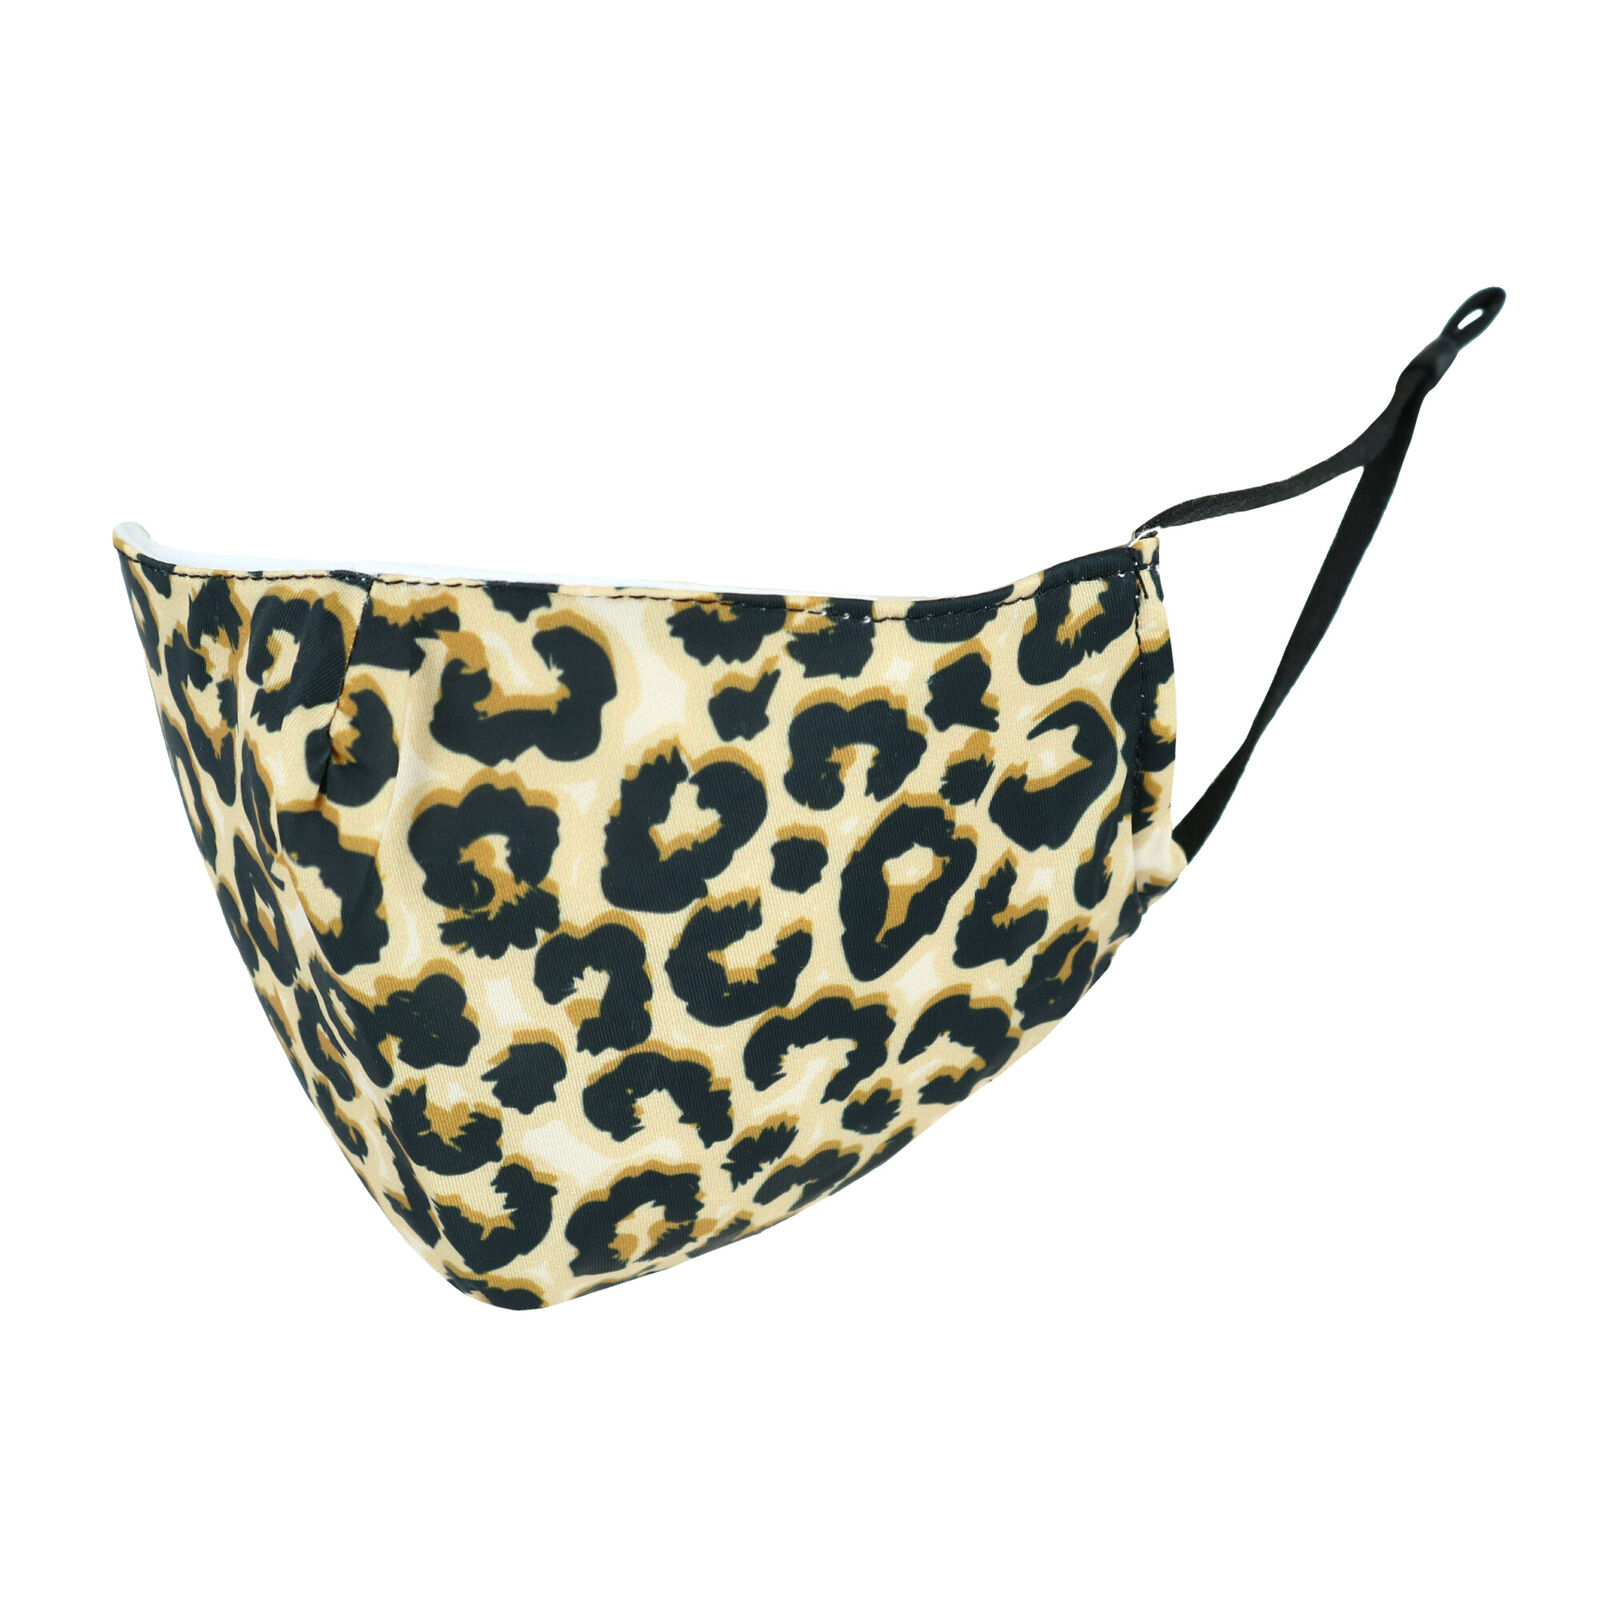 New Care Cover Adult Leopard Print Protective Face Mask With Built-in Filter